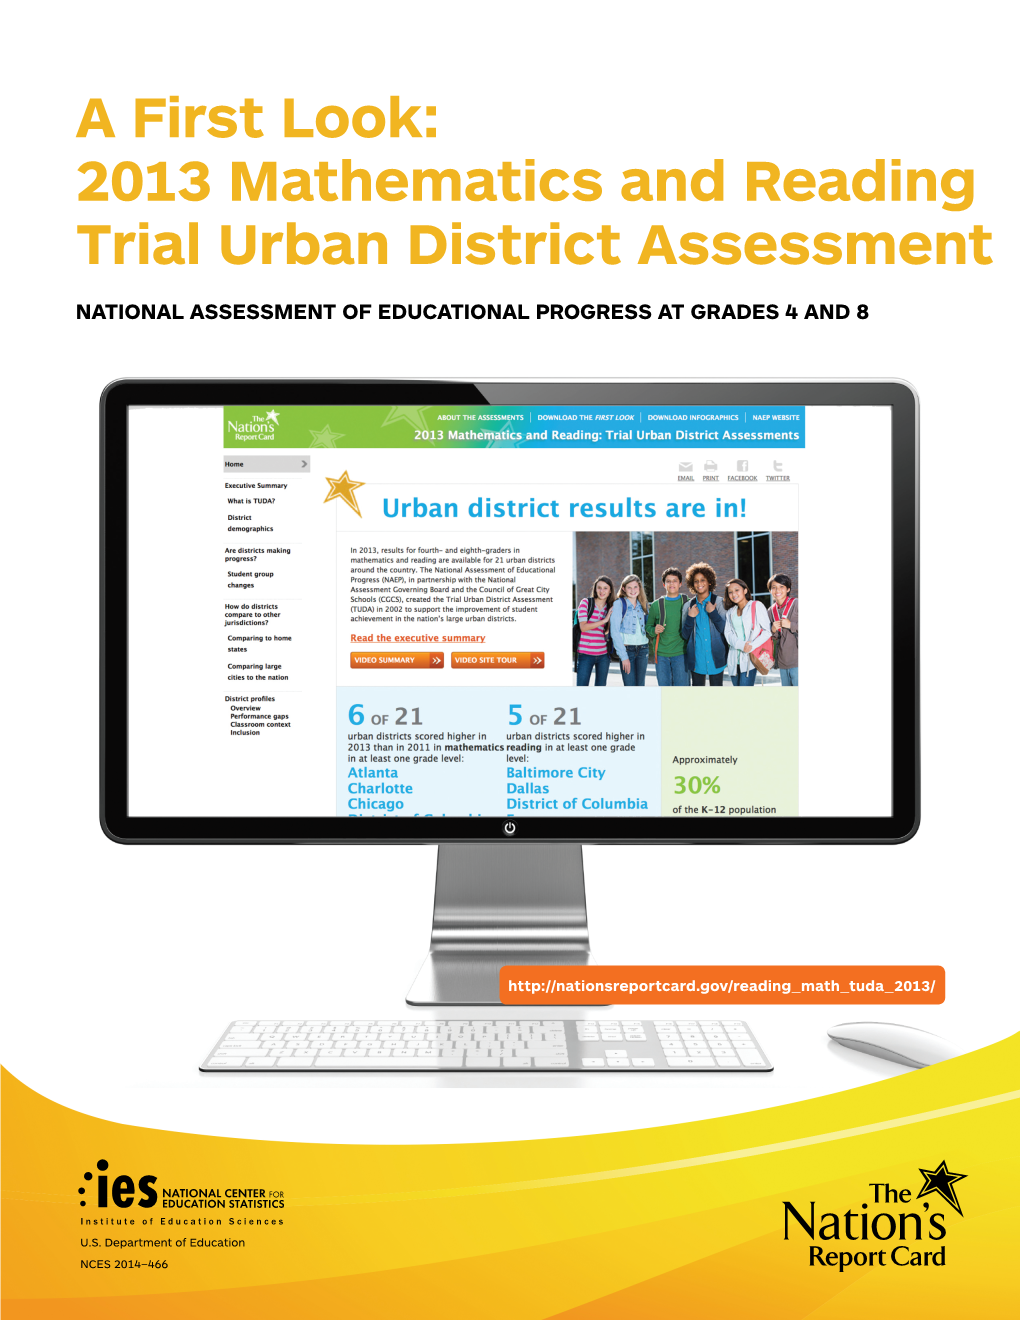 2013 Mathematics and Reading Trial Urban District Assessment